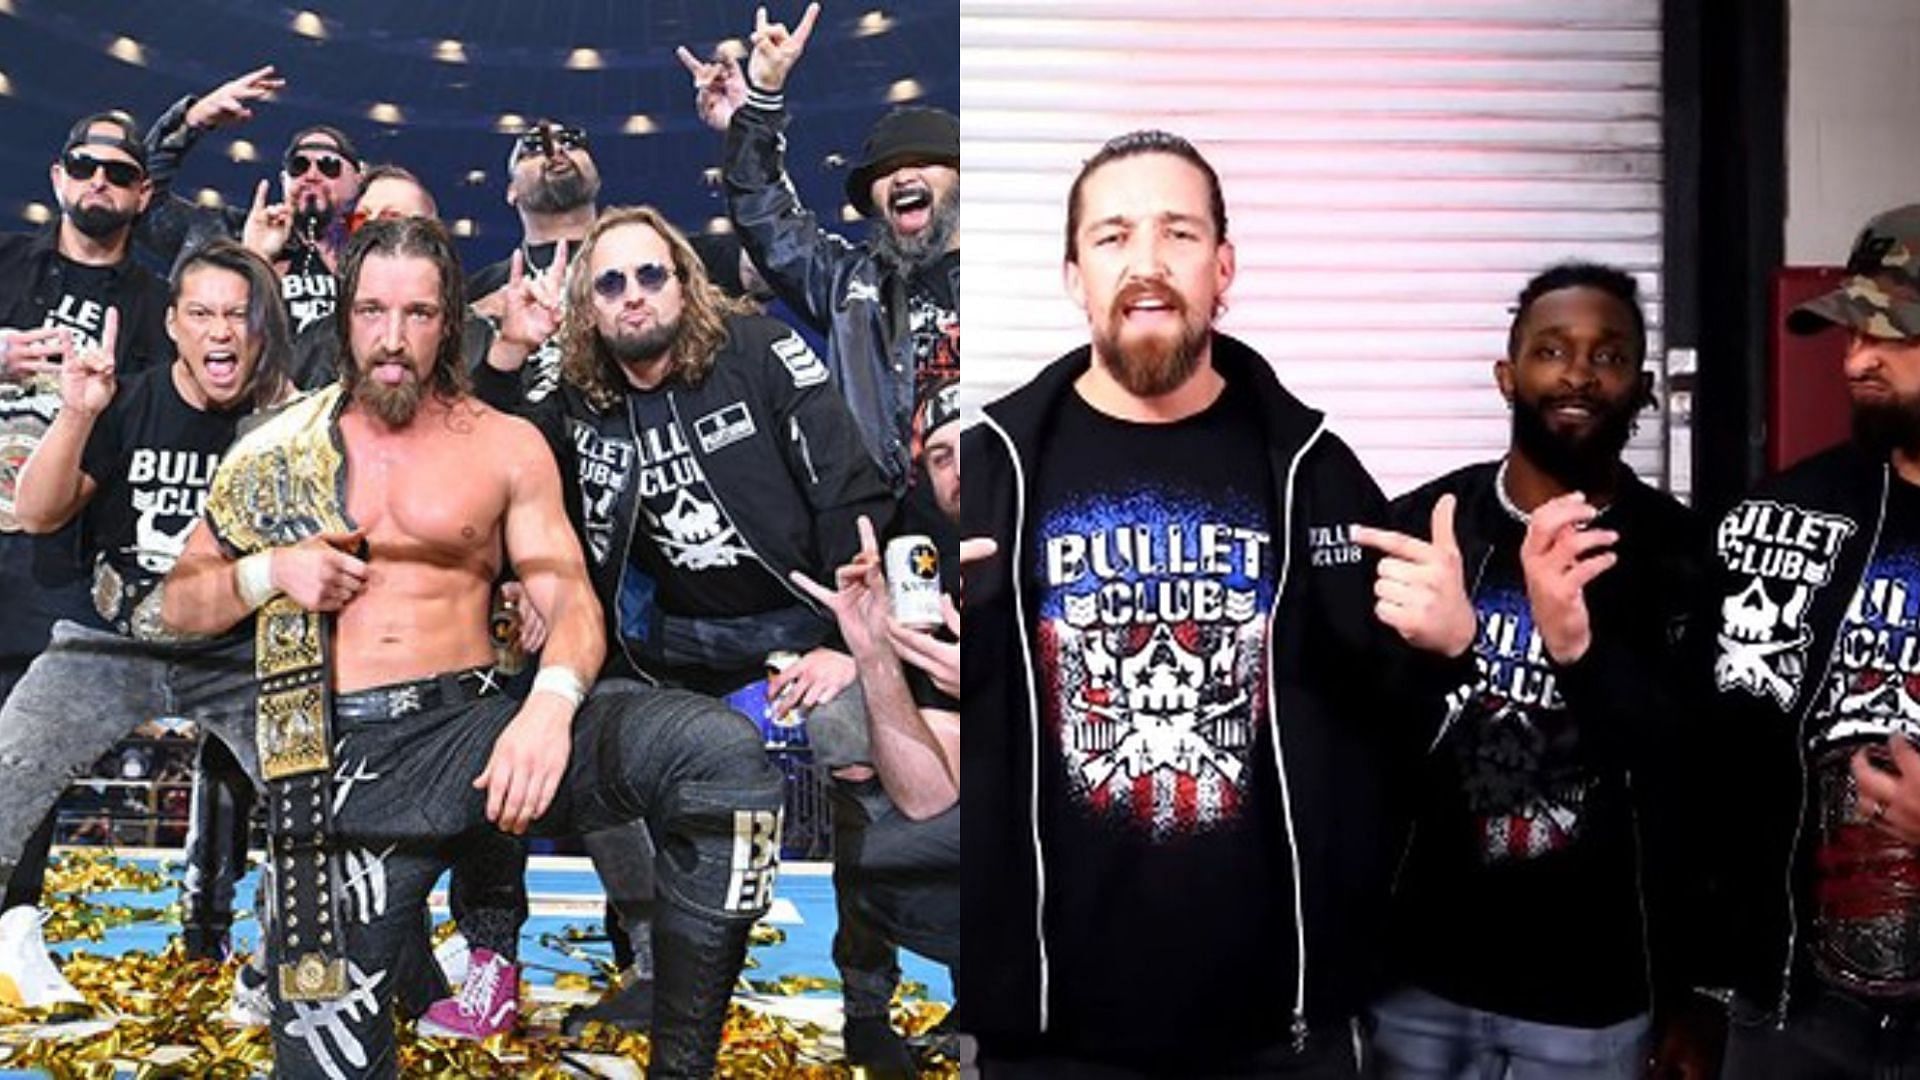 Bullet Club could witness a civil war